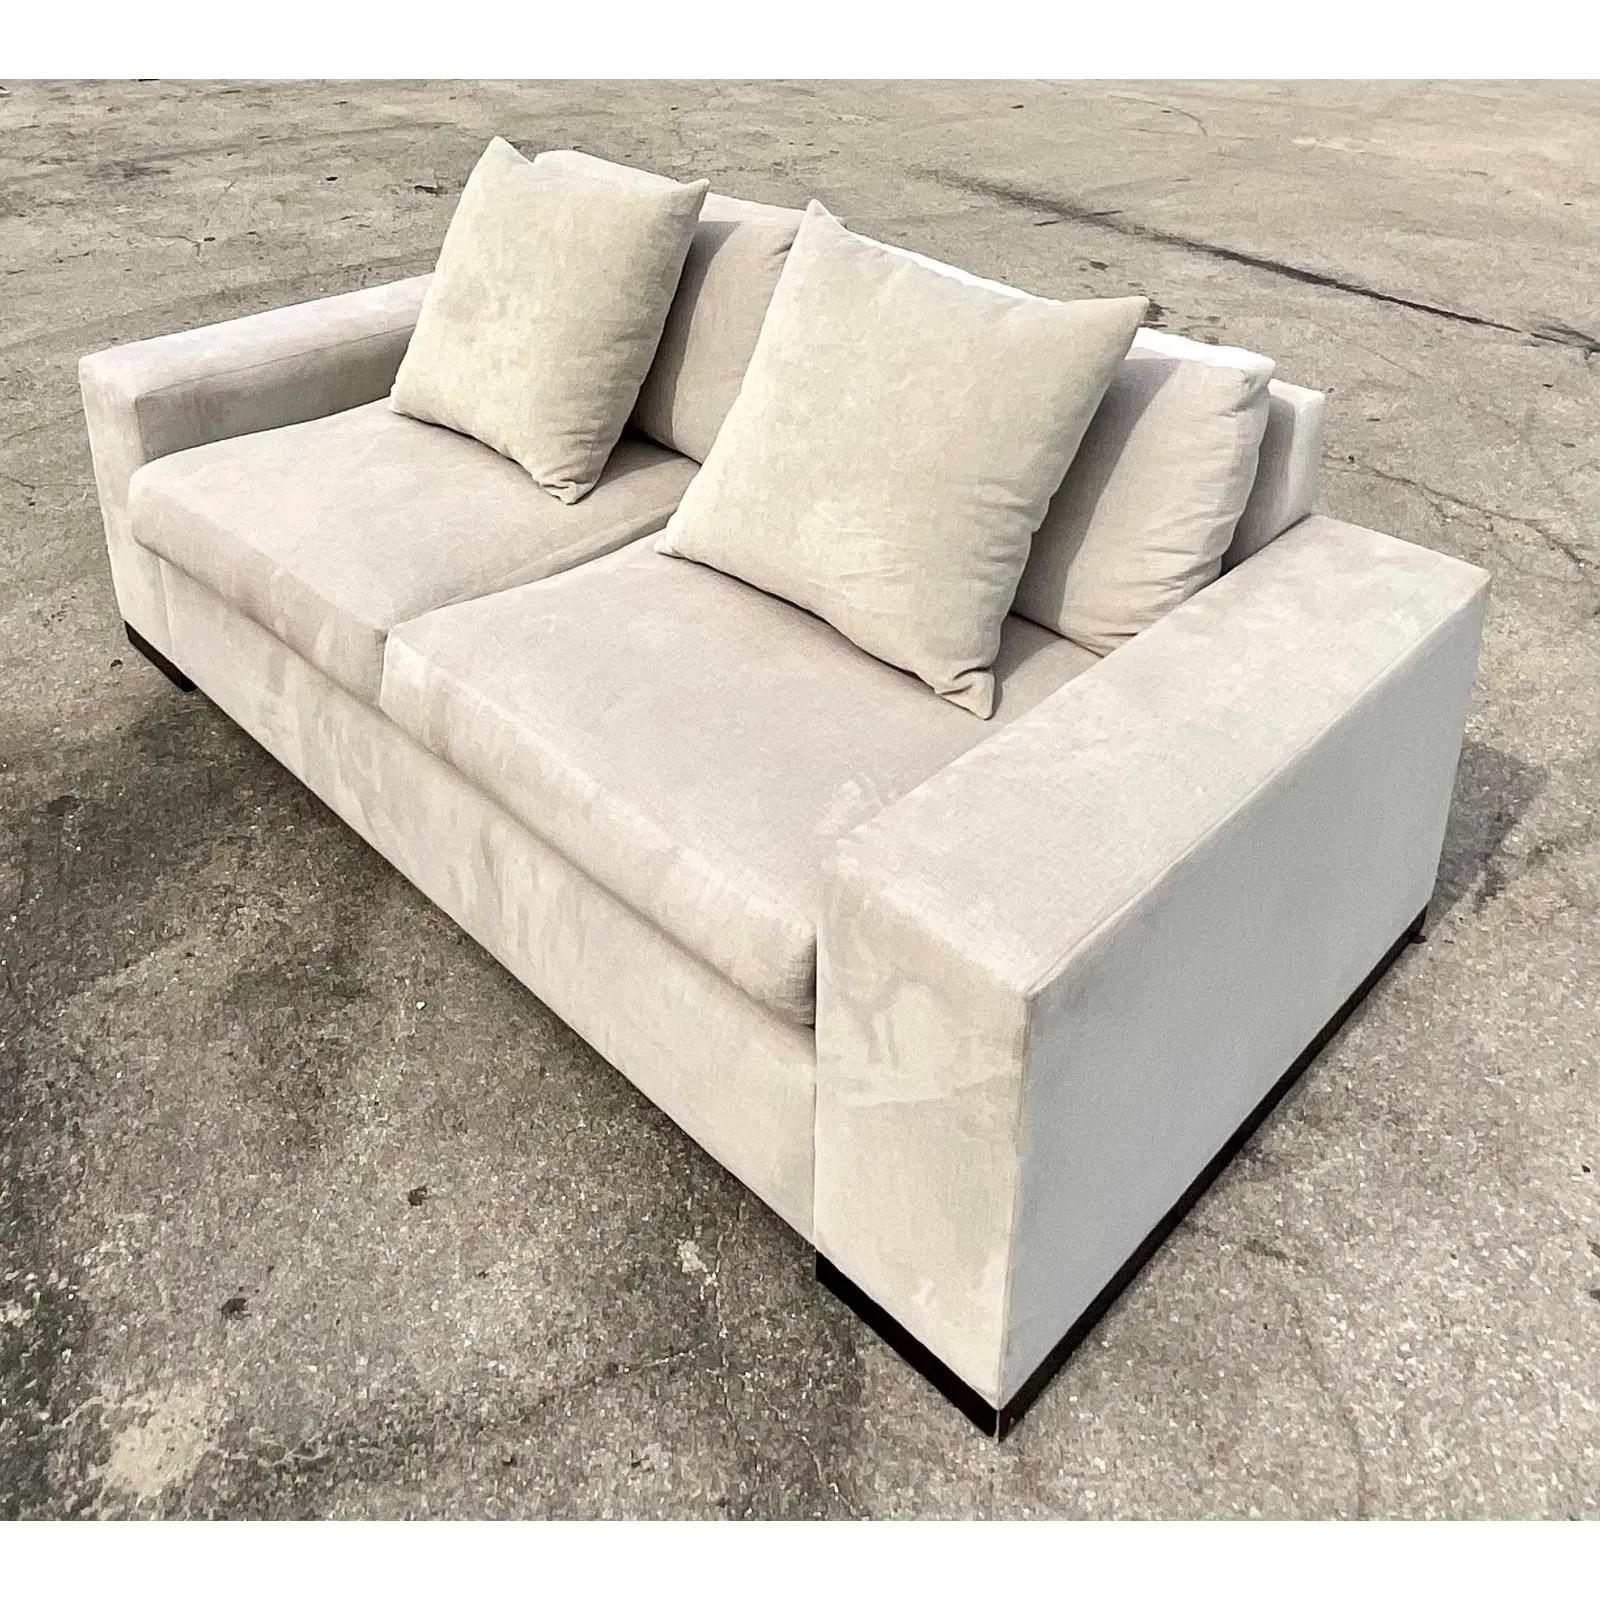 A fantastic vintage Restoration Hardware sofa. The coveted Modena Track Arm design in plush grey velvet. Deep pesetas and plump cushions make this a perfect spot to relax. Rests on wooden plinths. Acquired from a Palm Beach estate.